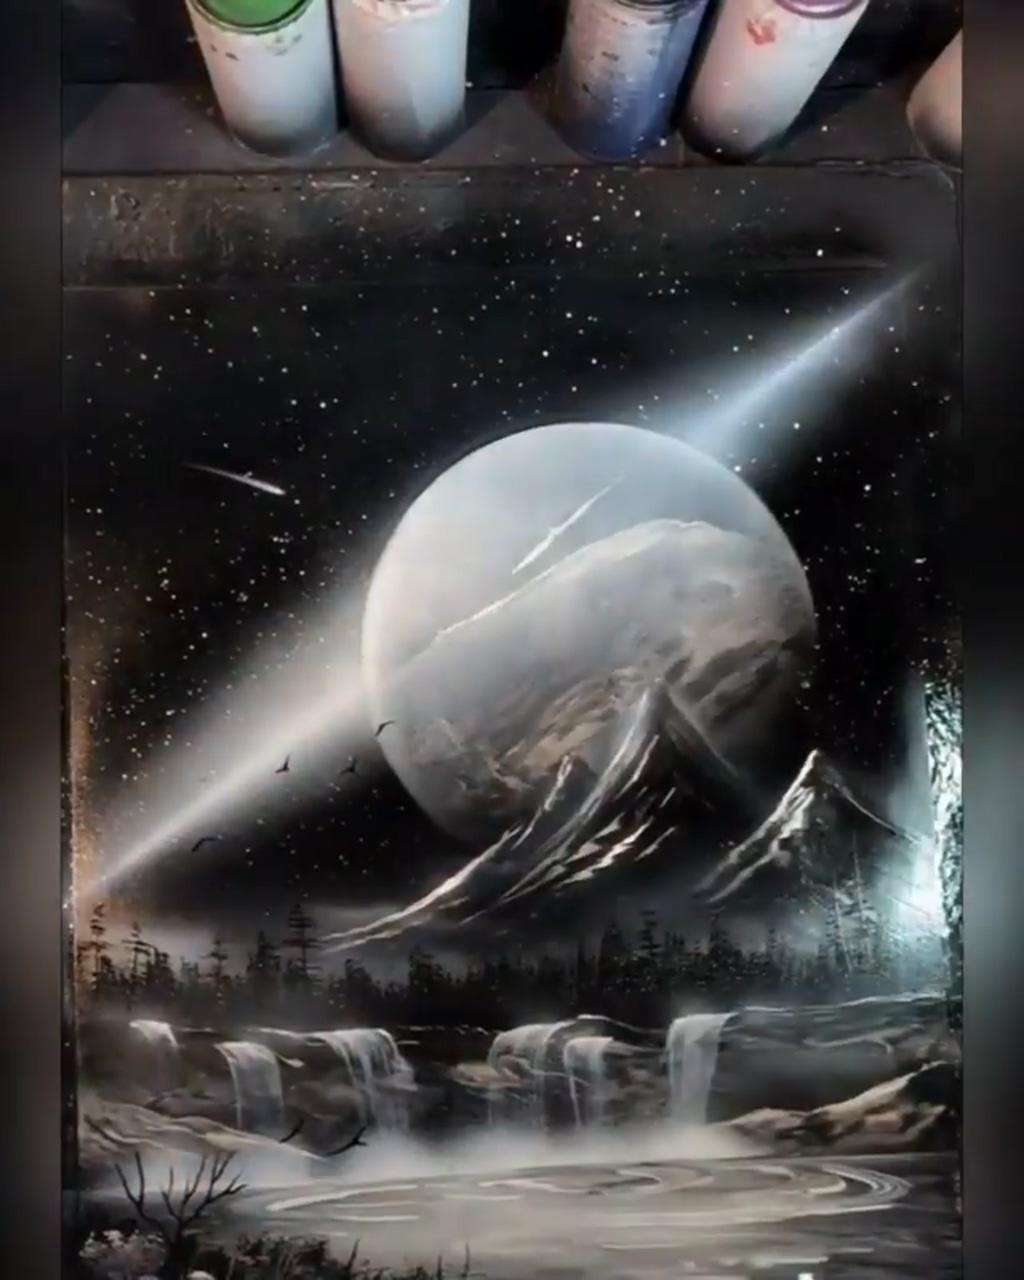 Wait for the final result - you won't regret it.  artist : huituo space spray painting art user on douyin app; spray paint artwork